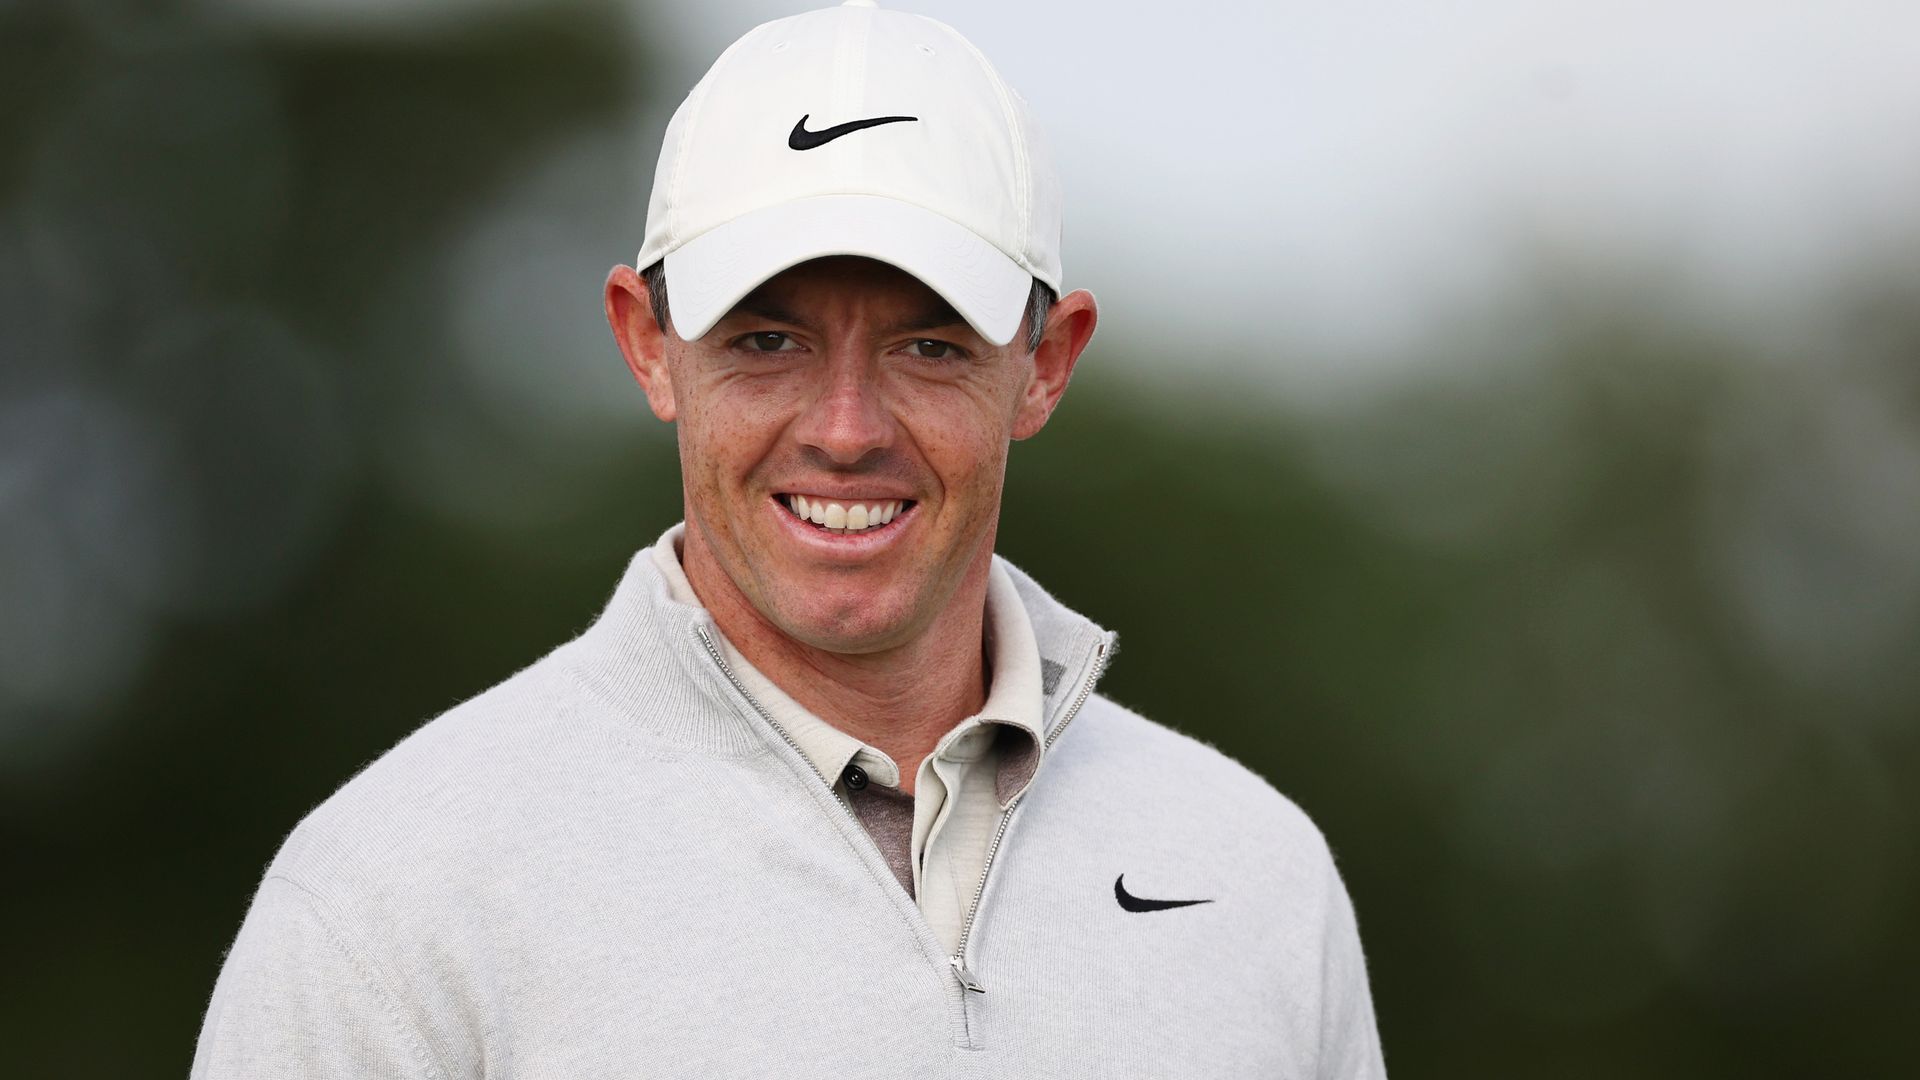 McIlroy makes fast start as An leads Scottish Open